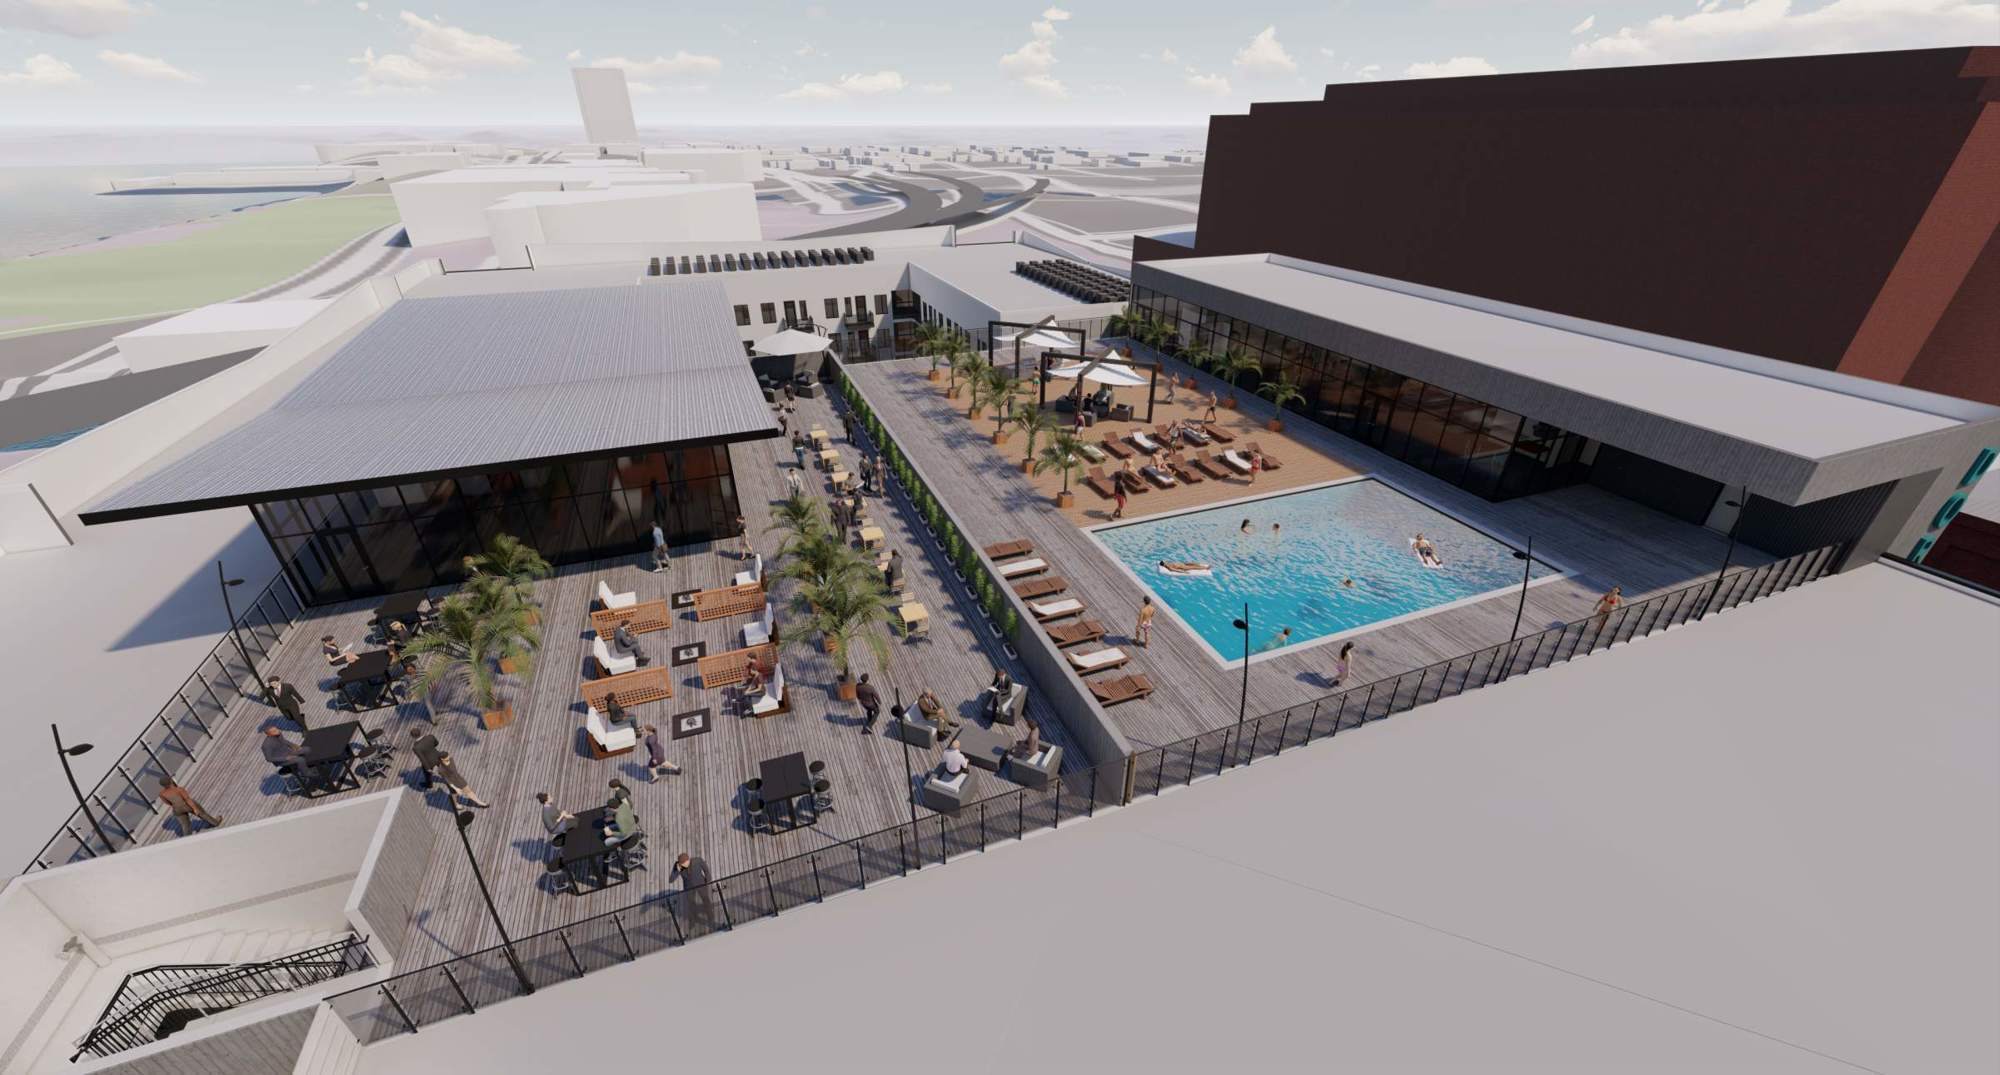 A rooftop pool and bar are planned for The Doro.